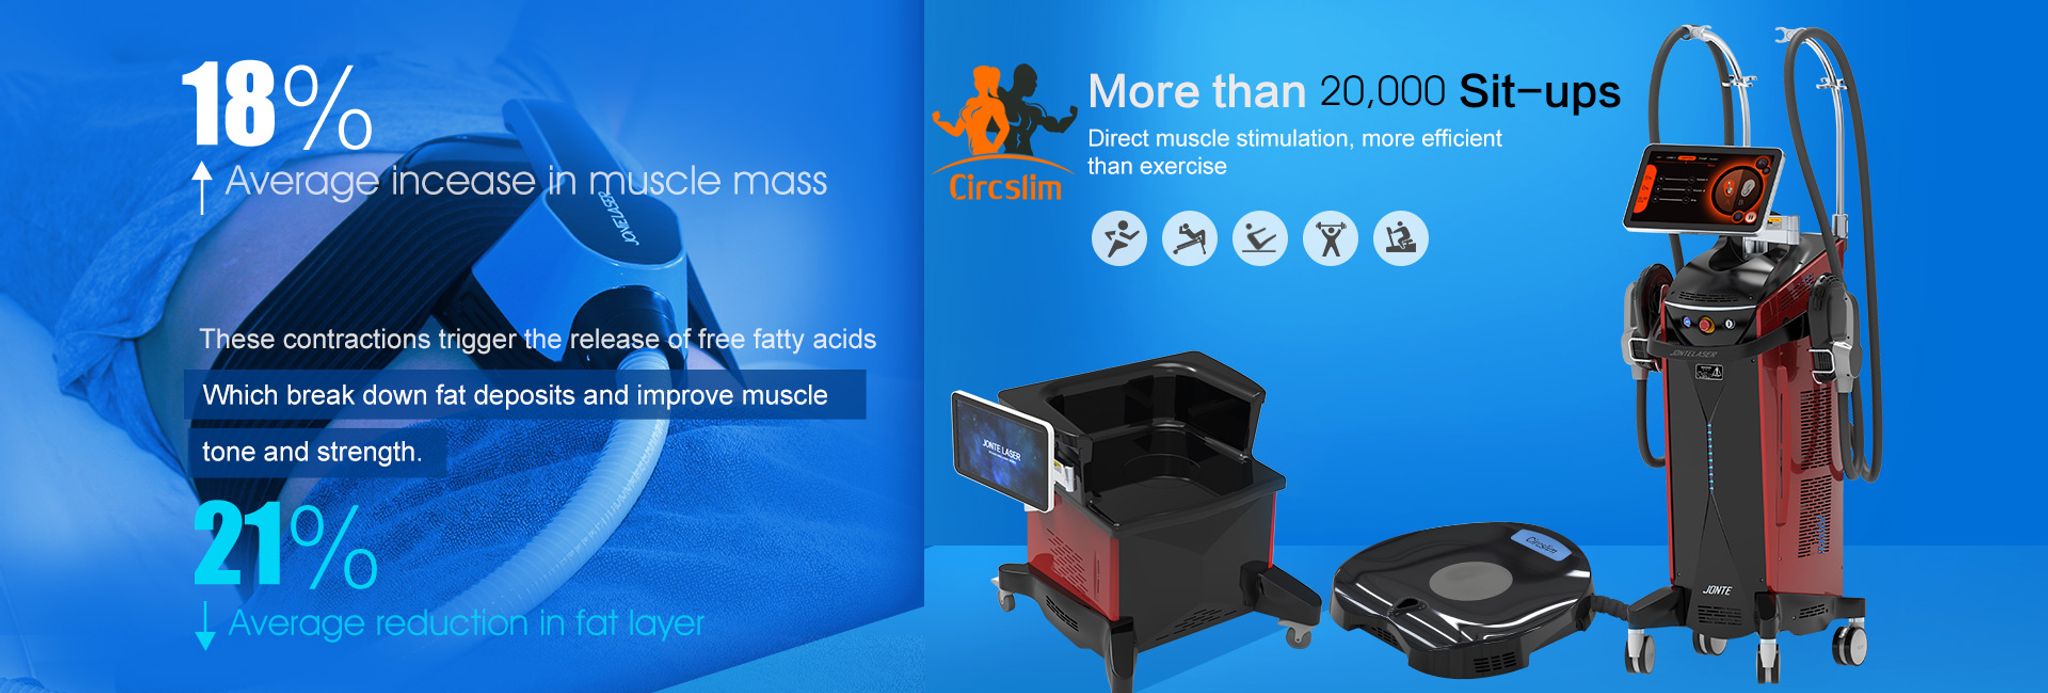 EMS Body Sculpting machine offers 18% average increase in muscle mass